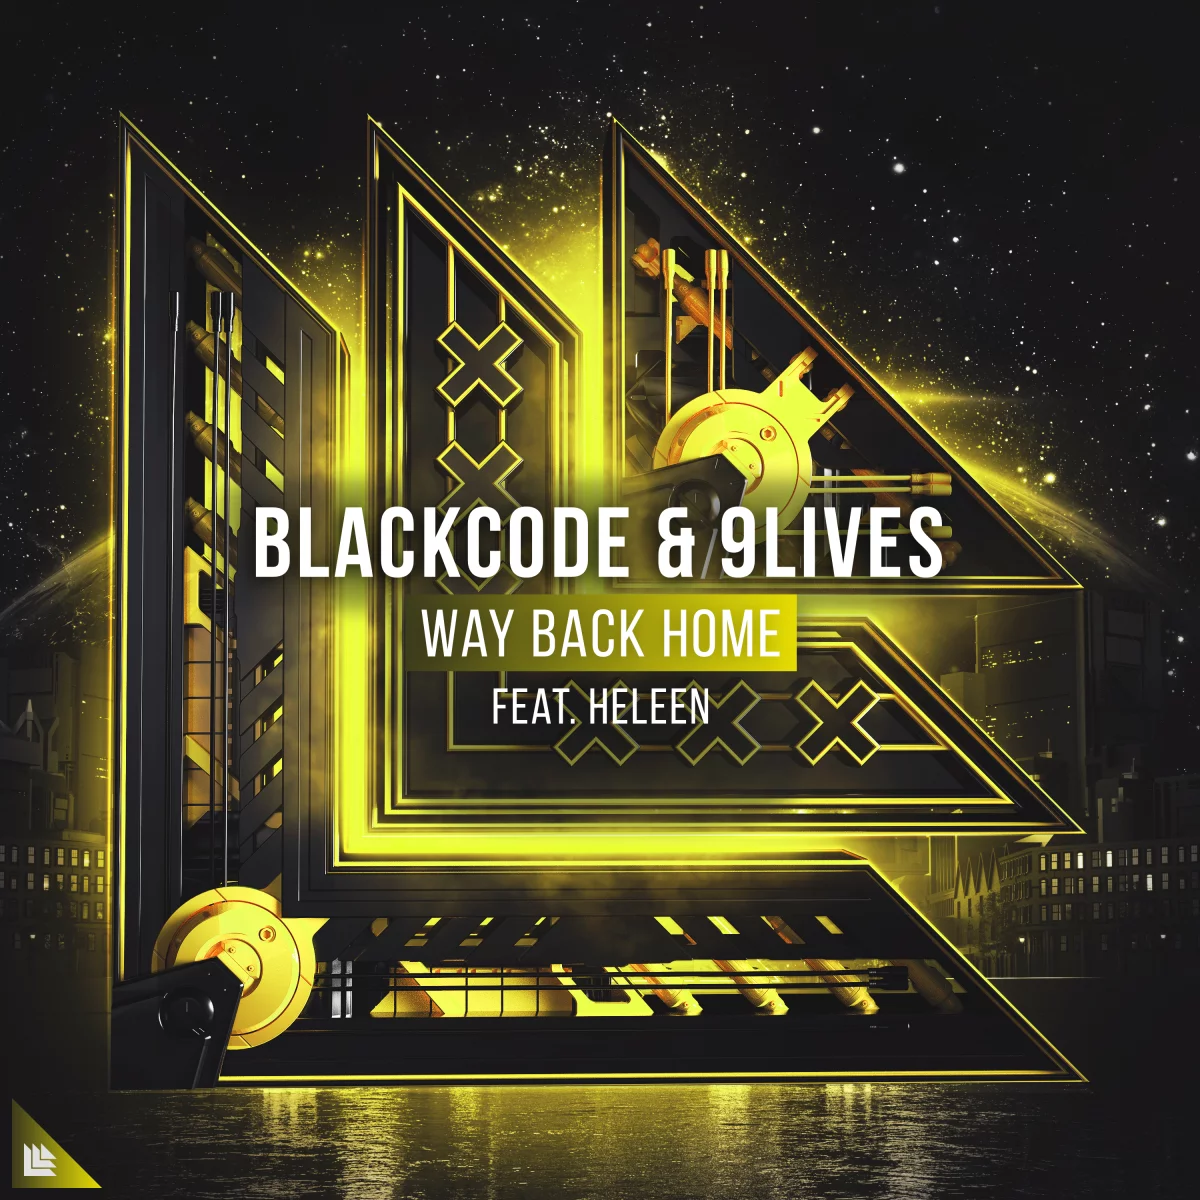 Way Back Home - Blackcode⁠ & 9Lives⁠ feat. Heleen